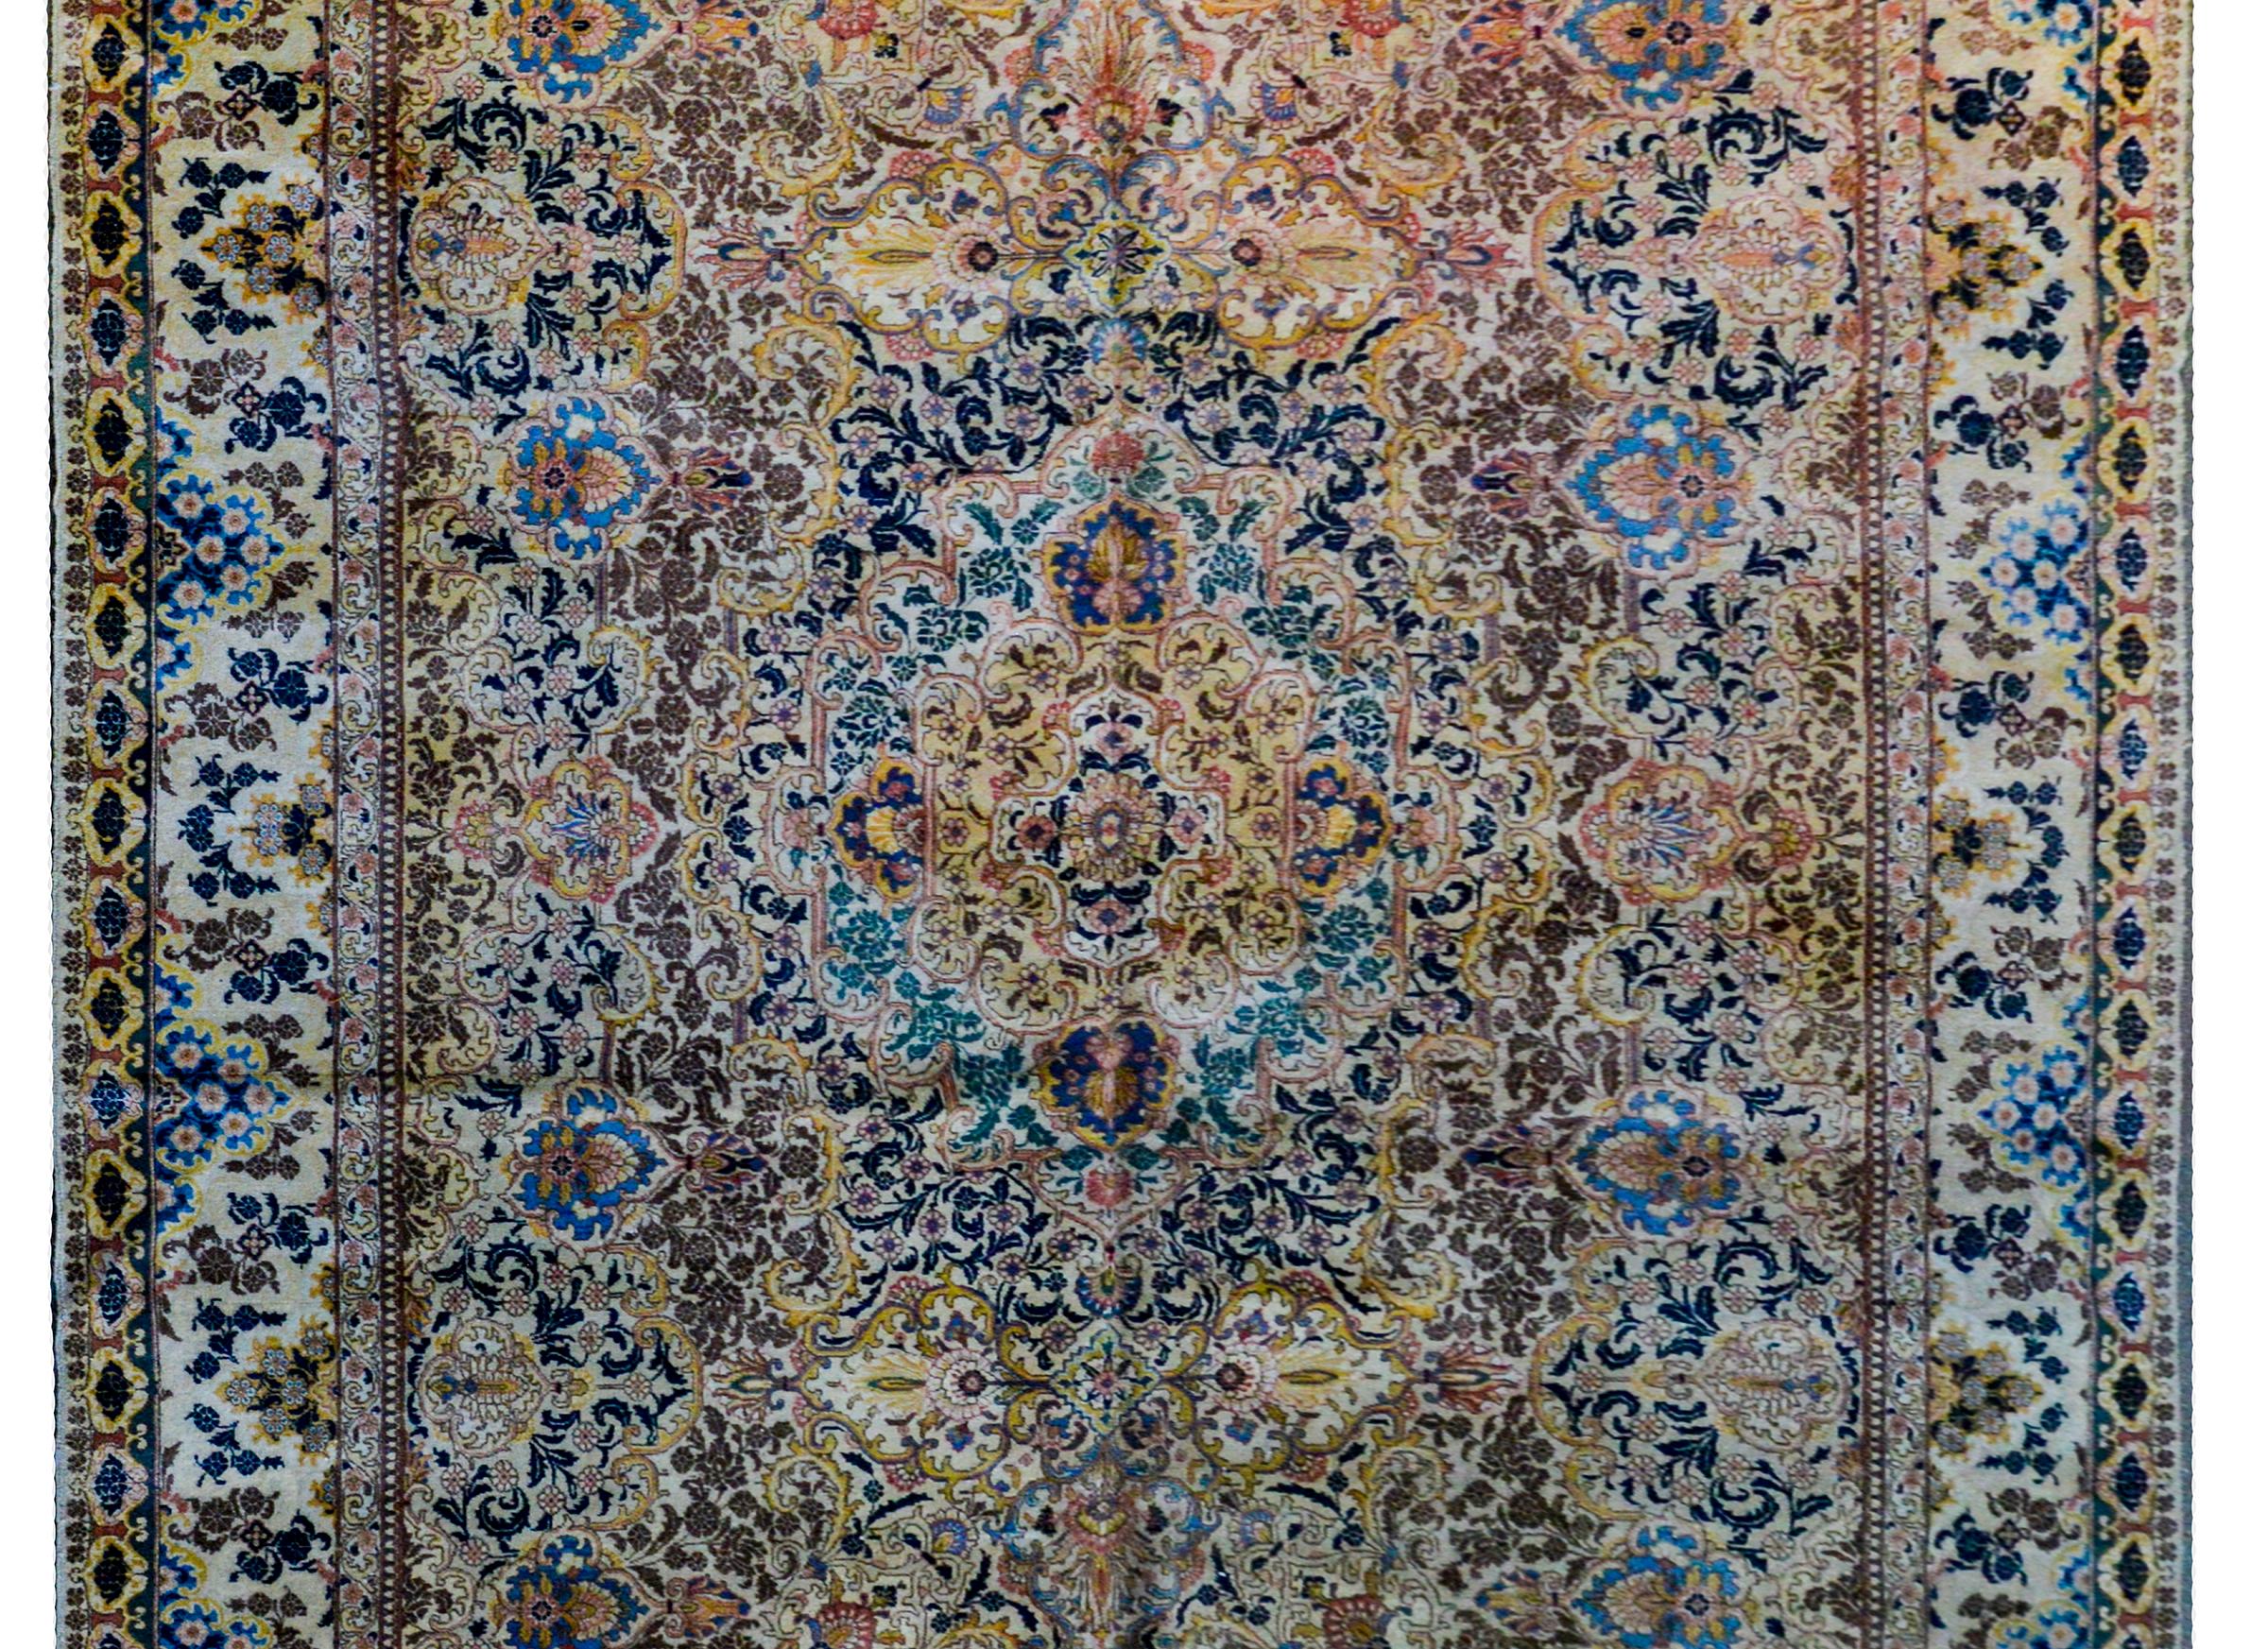 A mesmerizing early 20th century Persian Tabriz rug with medallion on top of medallion on top of medallion, each with a myriad flowers and scrolling vines and leaves woven in light and dark indigo, pink, gold, green, cream, and brown vegetable dyed